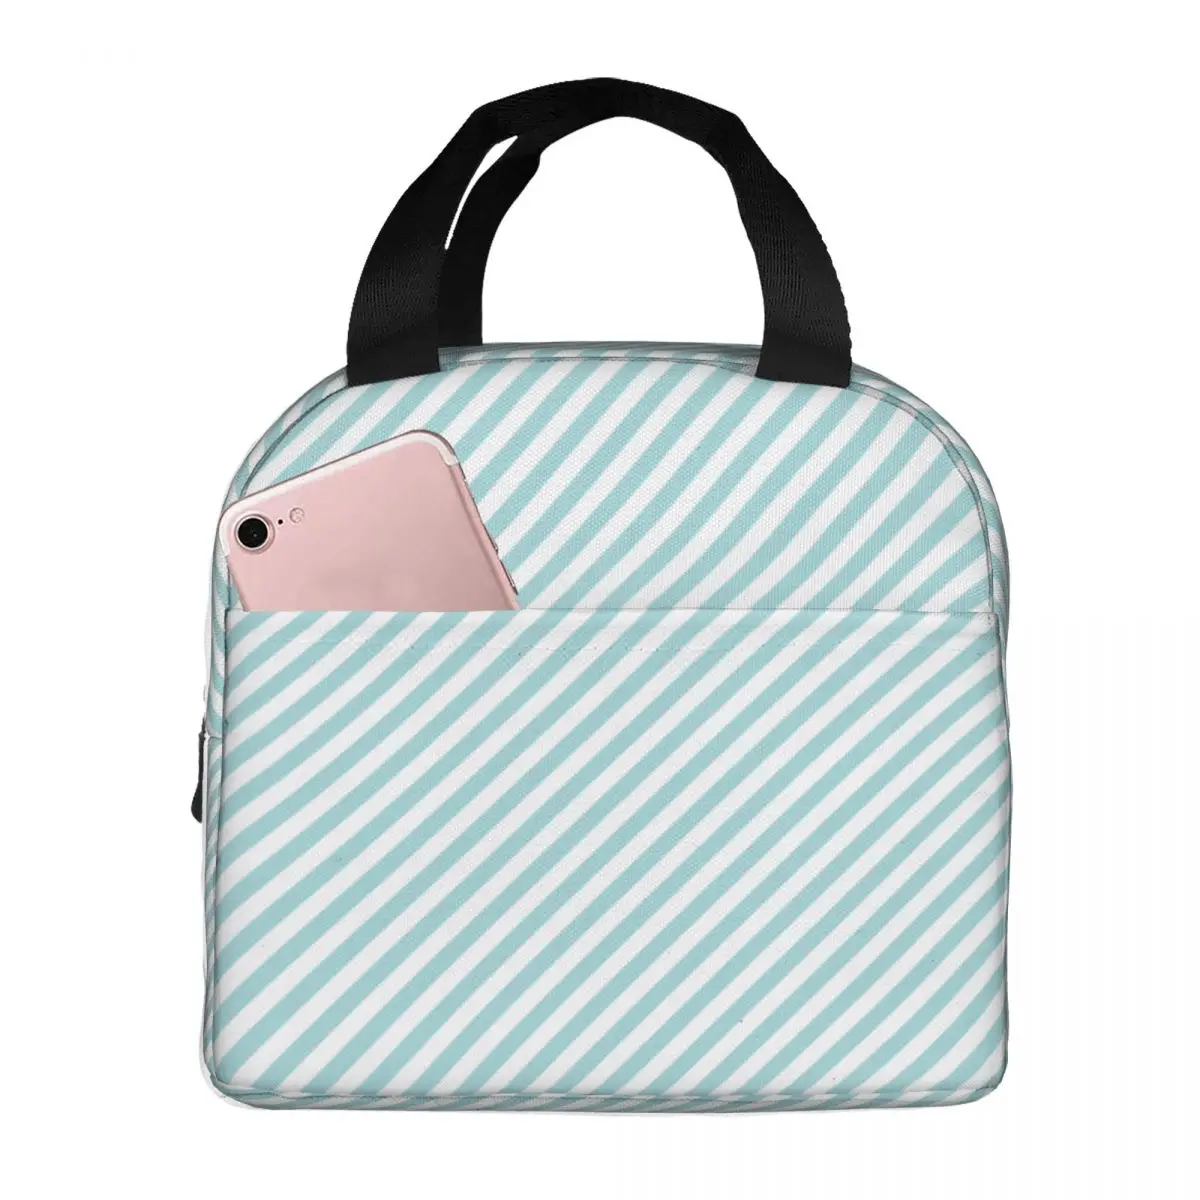 Stripes Blue Lunch Bag Portable Insulated Oxford Cooler Thermal Food Picnic Travel Tote for Women Girl